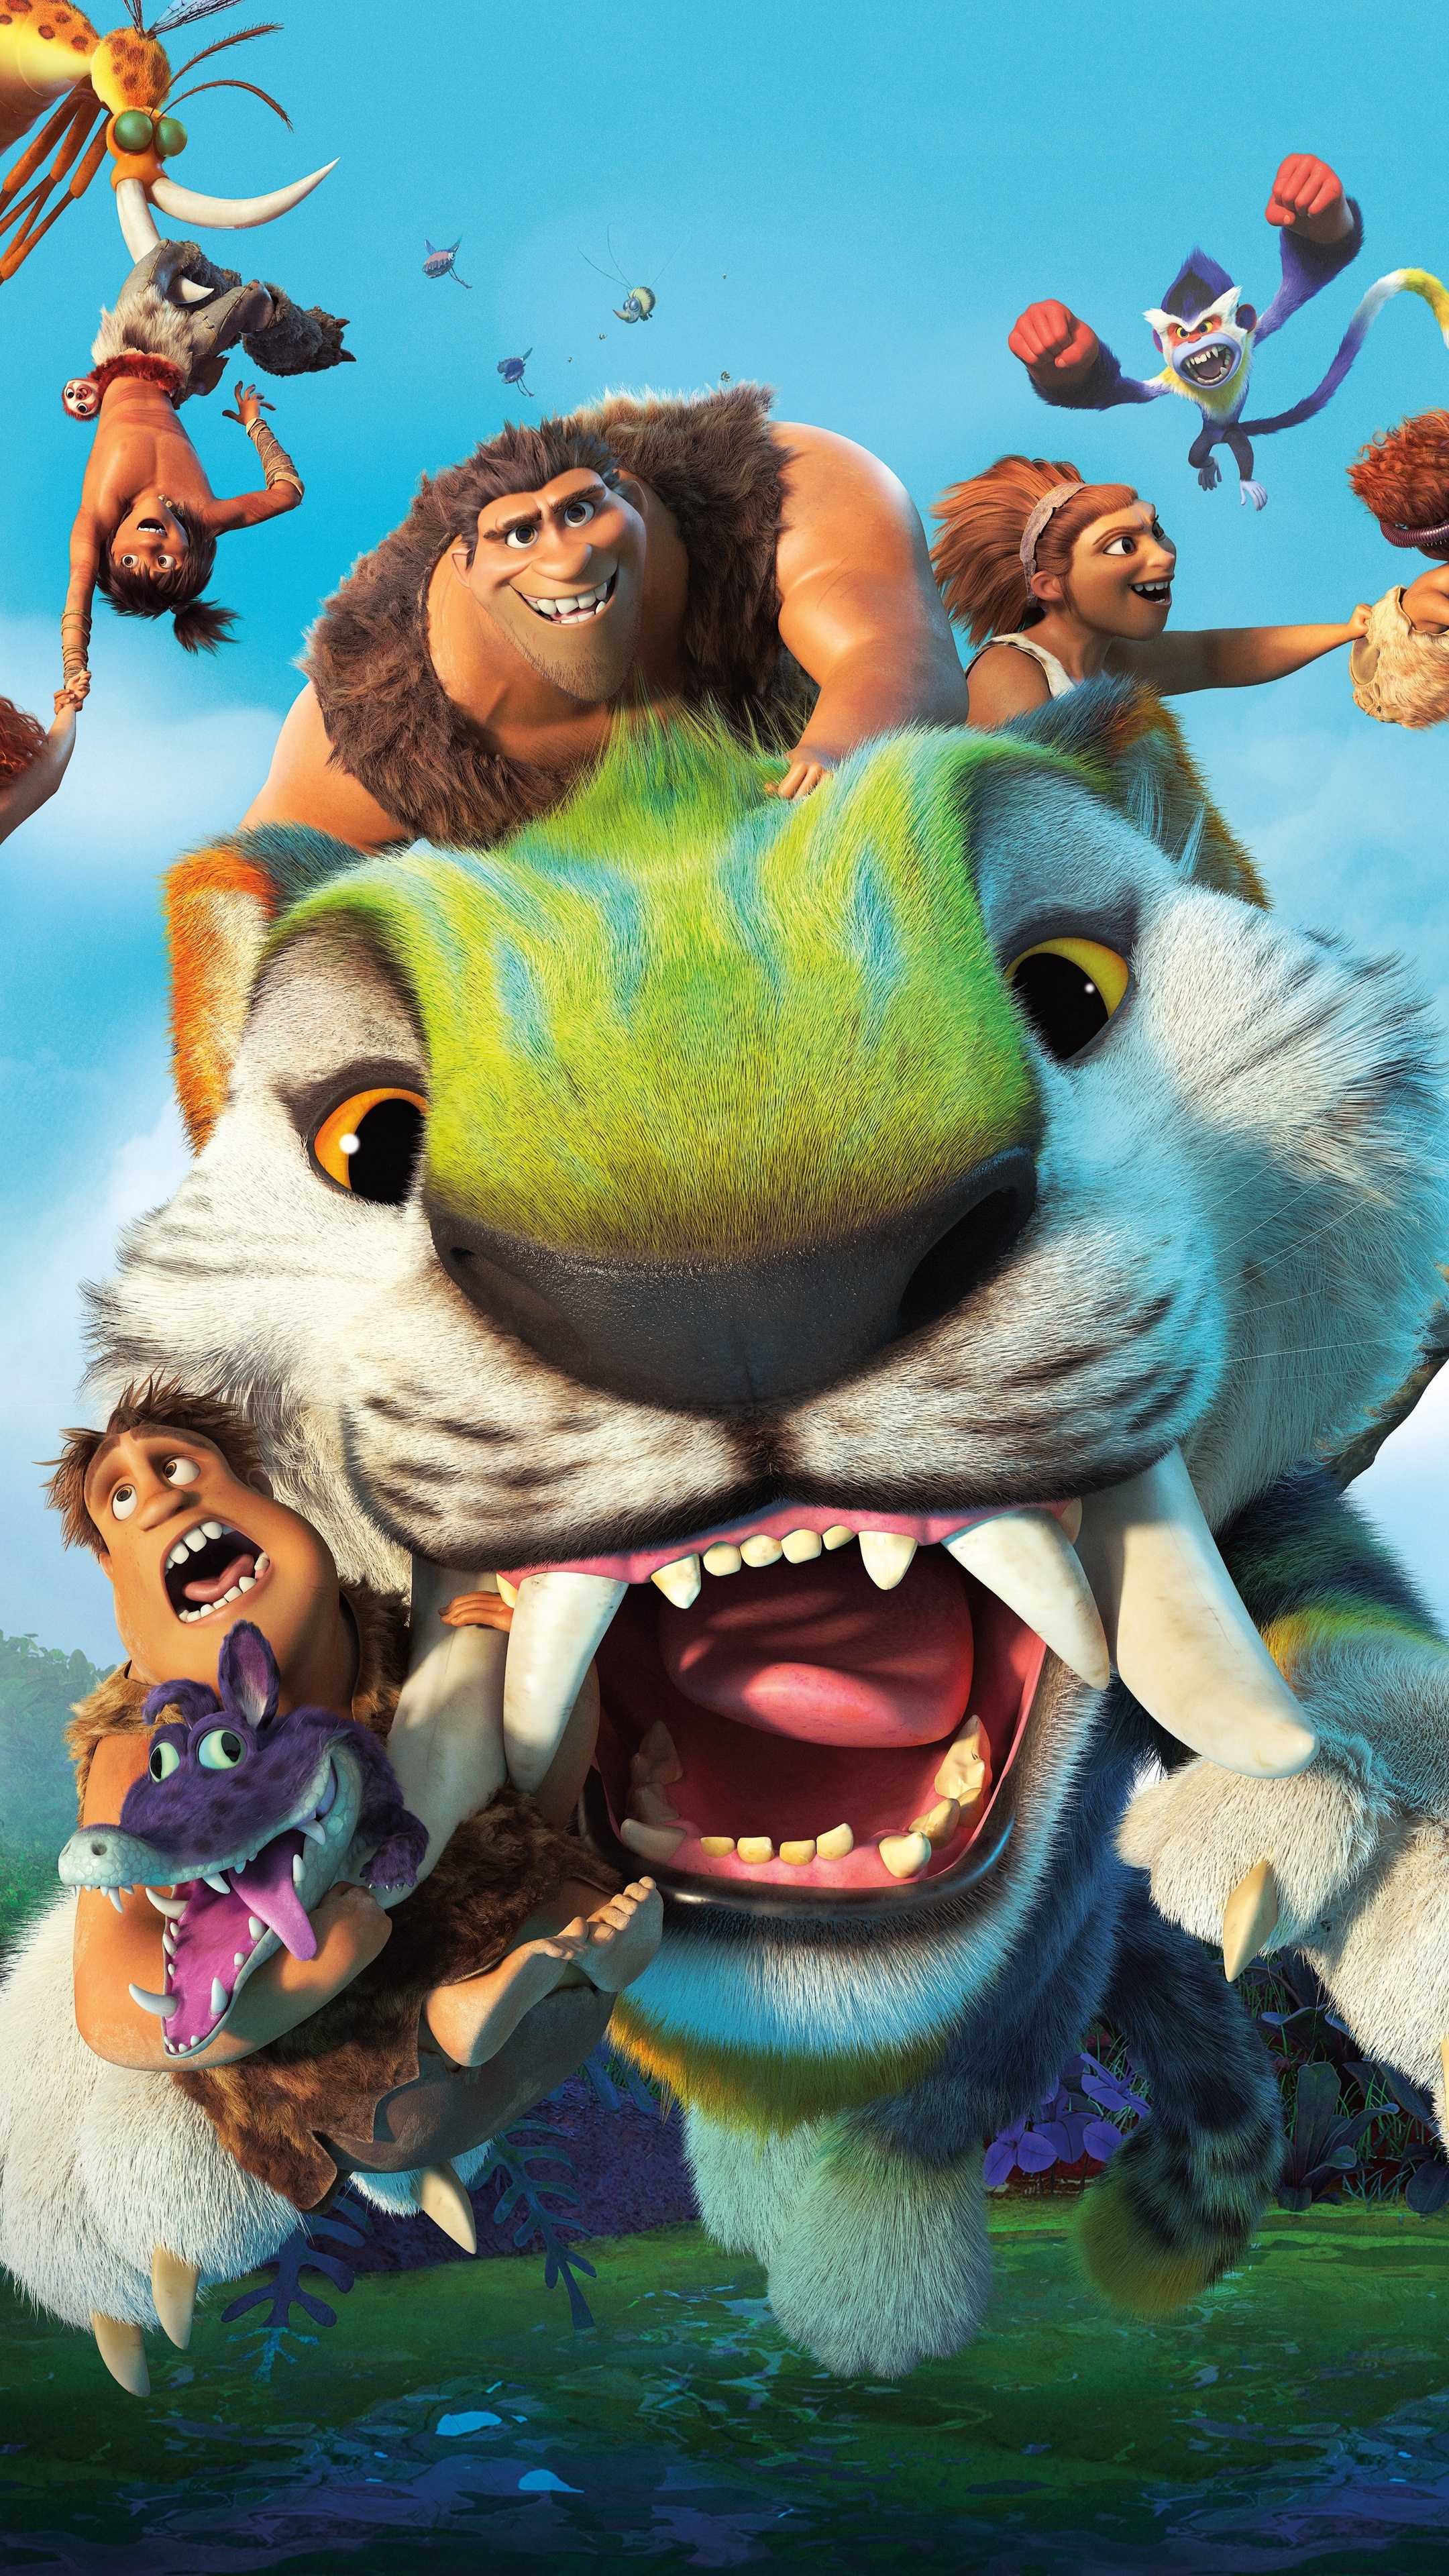 The Croods: A New Age wallpapers, Sony Xperia wallpapers, Stunning 4K images, High-resolution backgrounds, 2160x3840 4K Handy